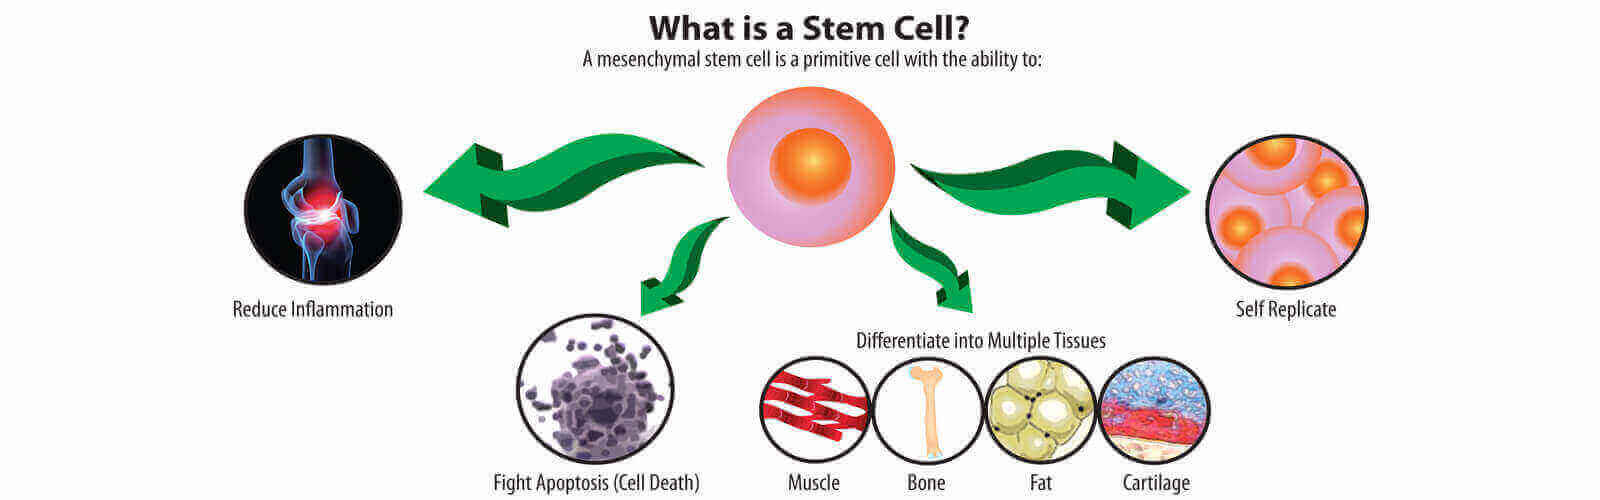 Stem Cell Treatment in New Zealand